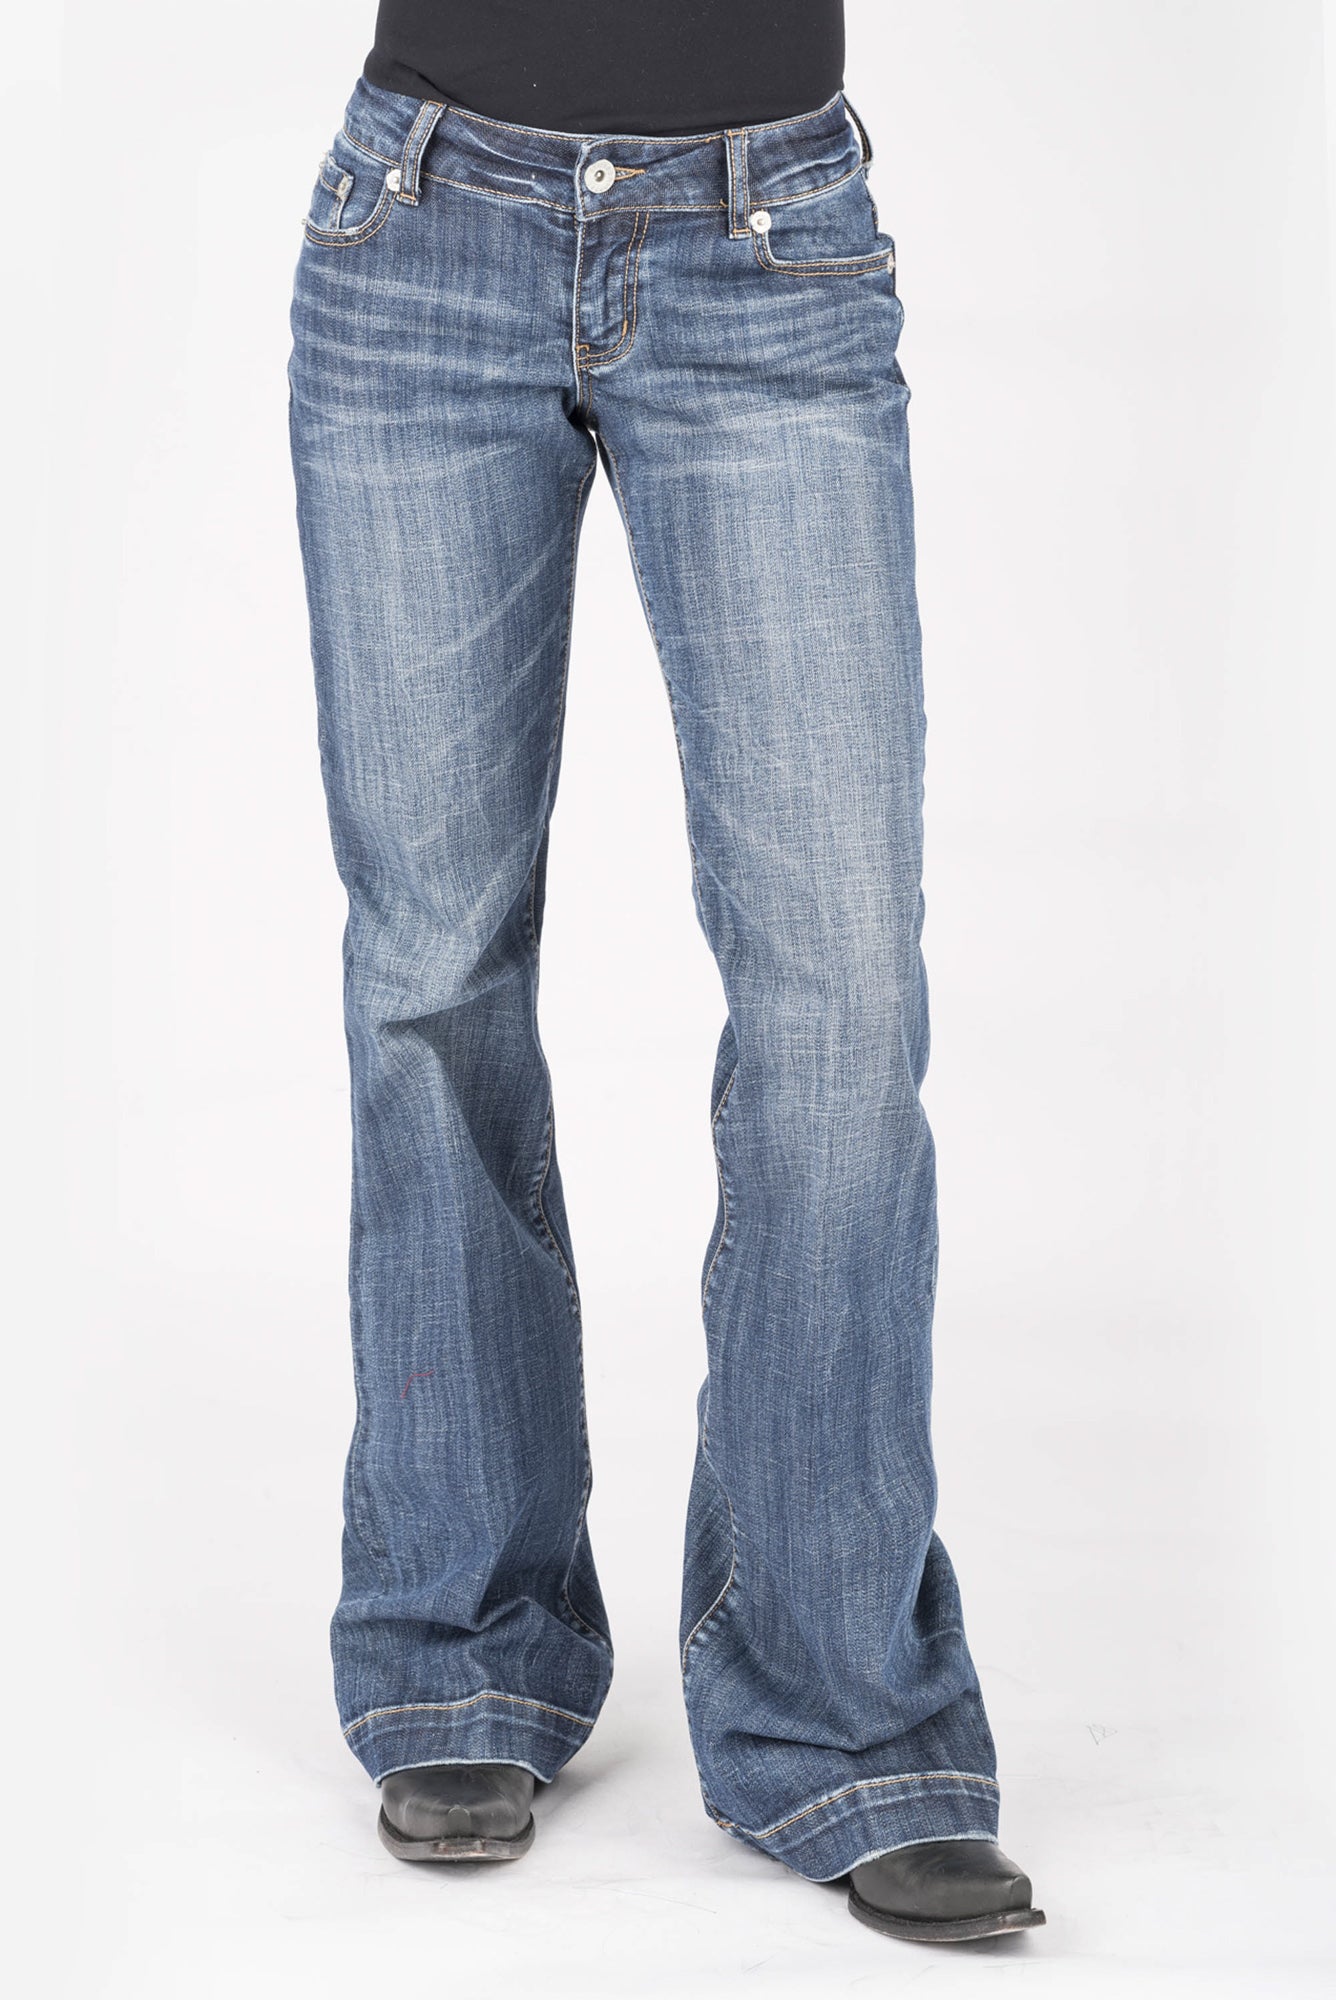 Stetson Womens Blue Cotton Blend Heavy Thread Jeans – The Western Company